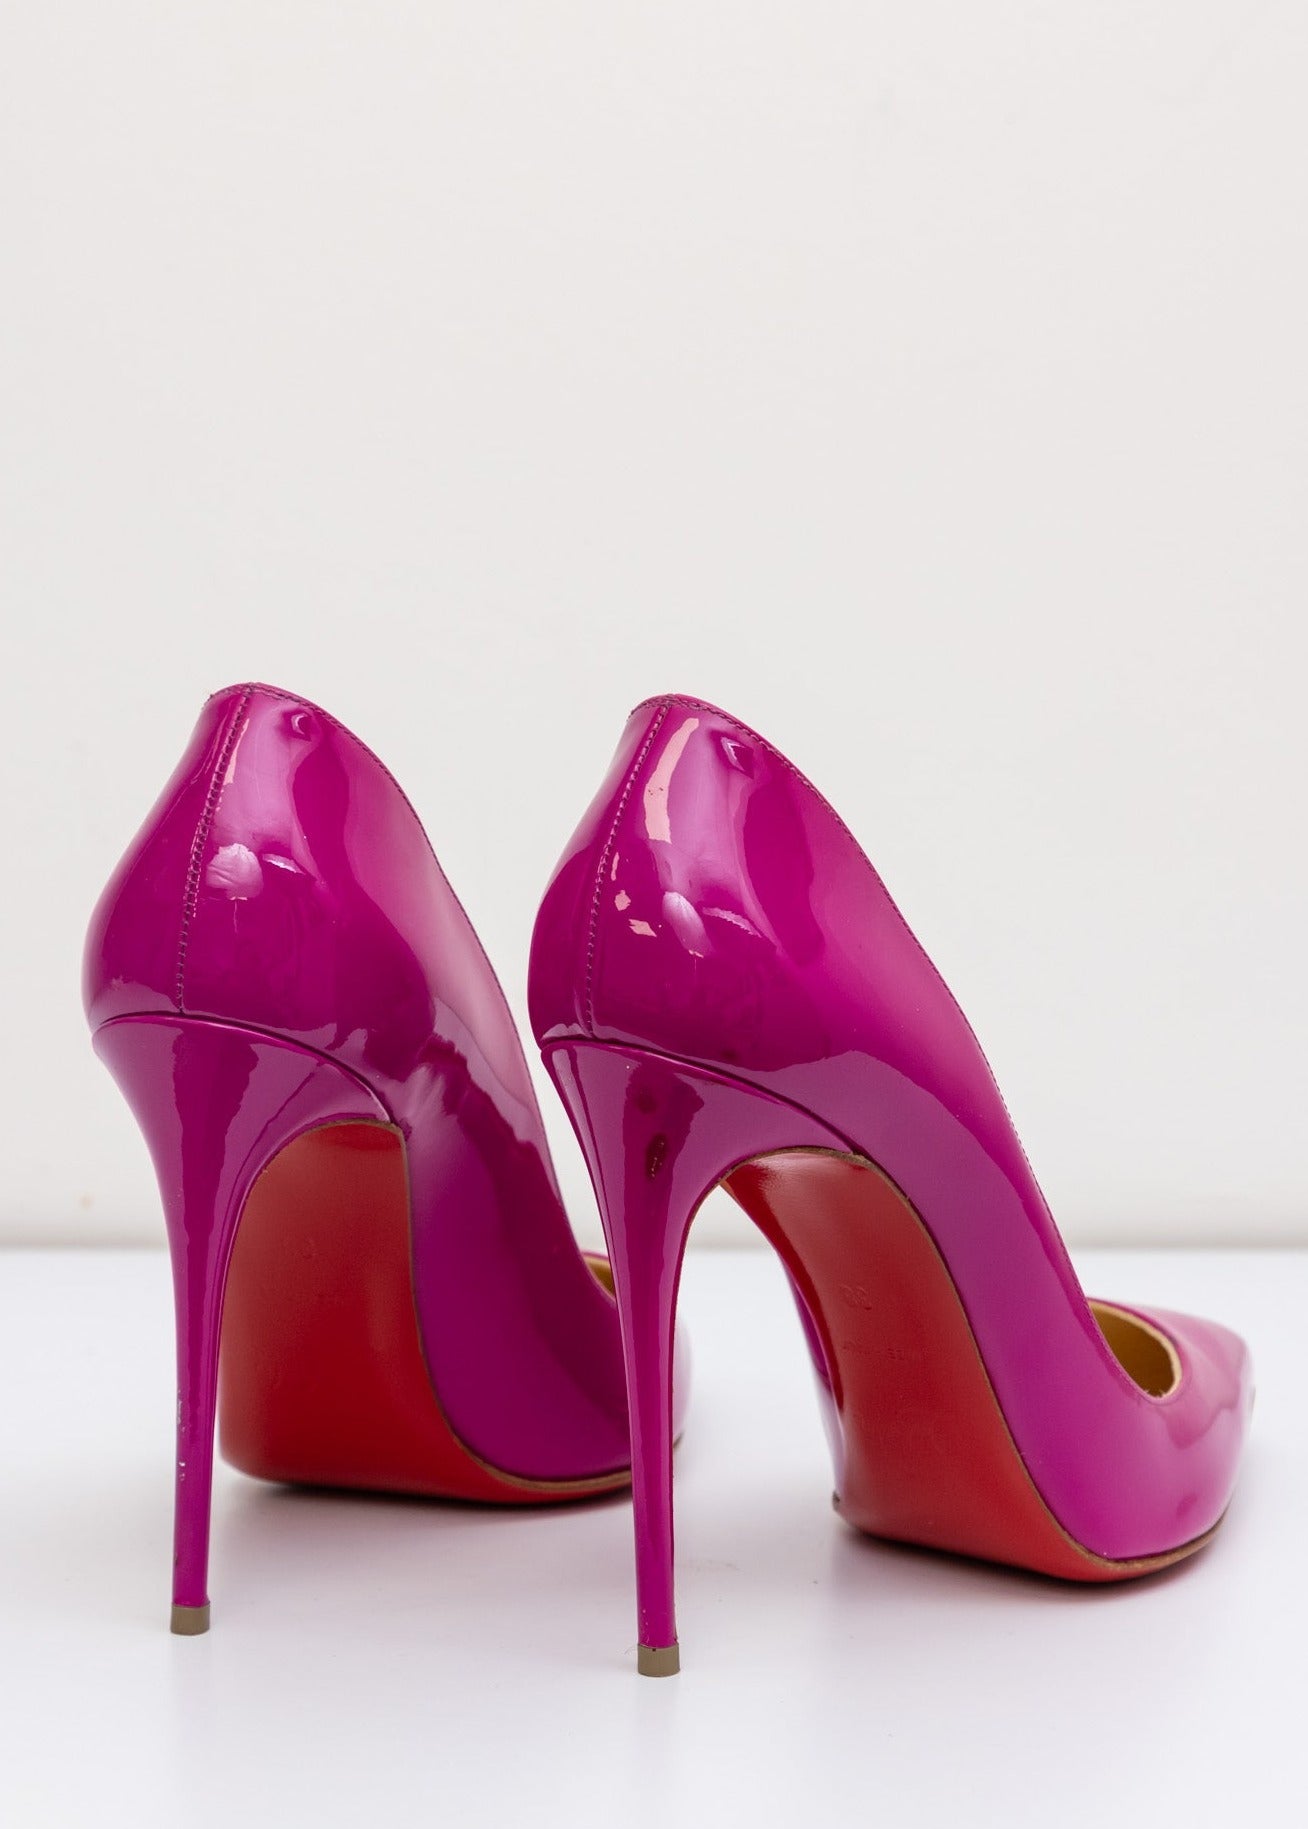 CHRISTIAN LOUBOUTIN Magenta Pink Patent Leather So Kate Pumps